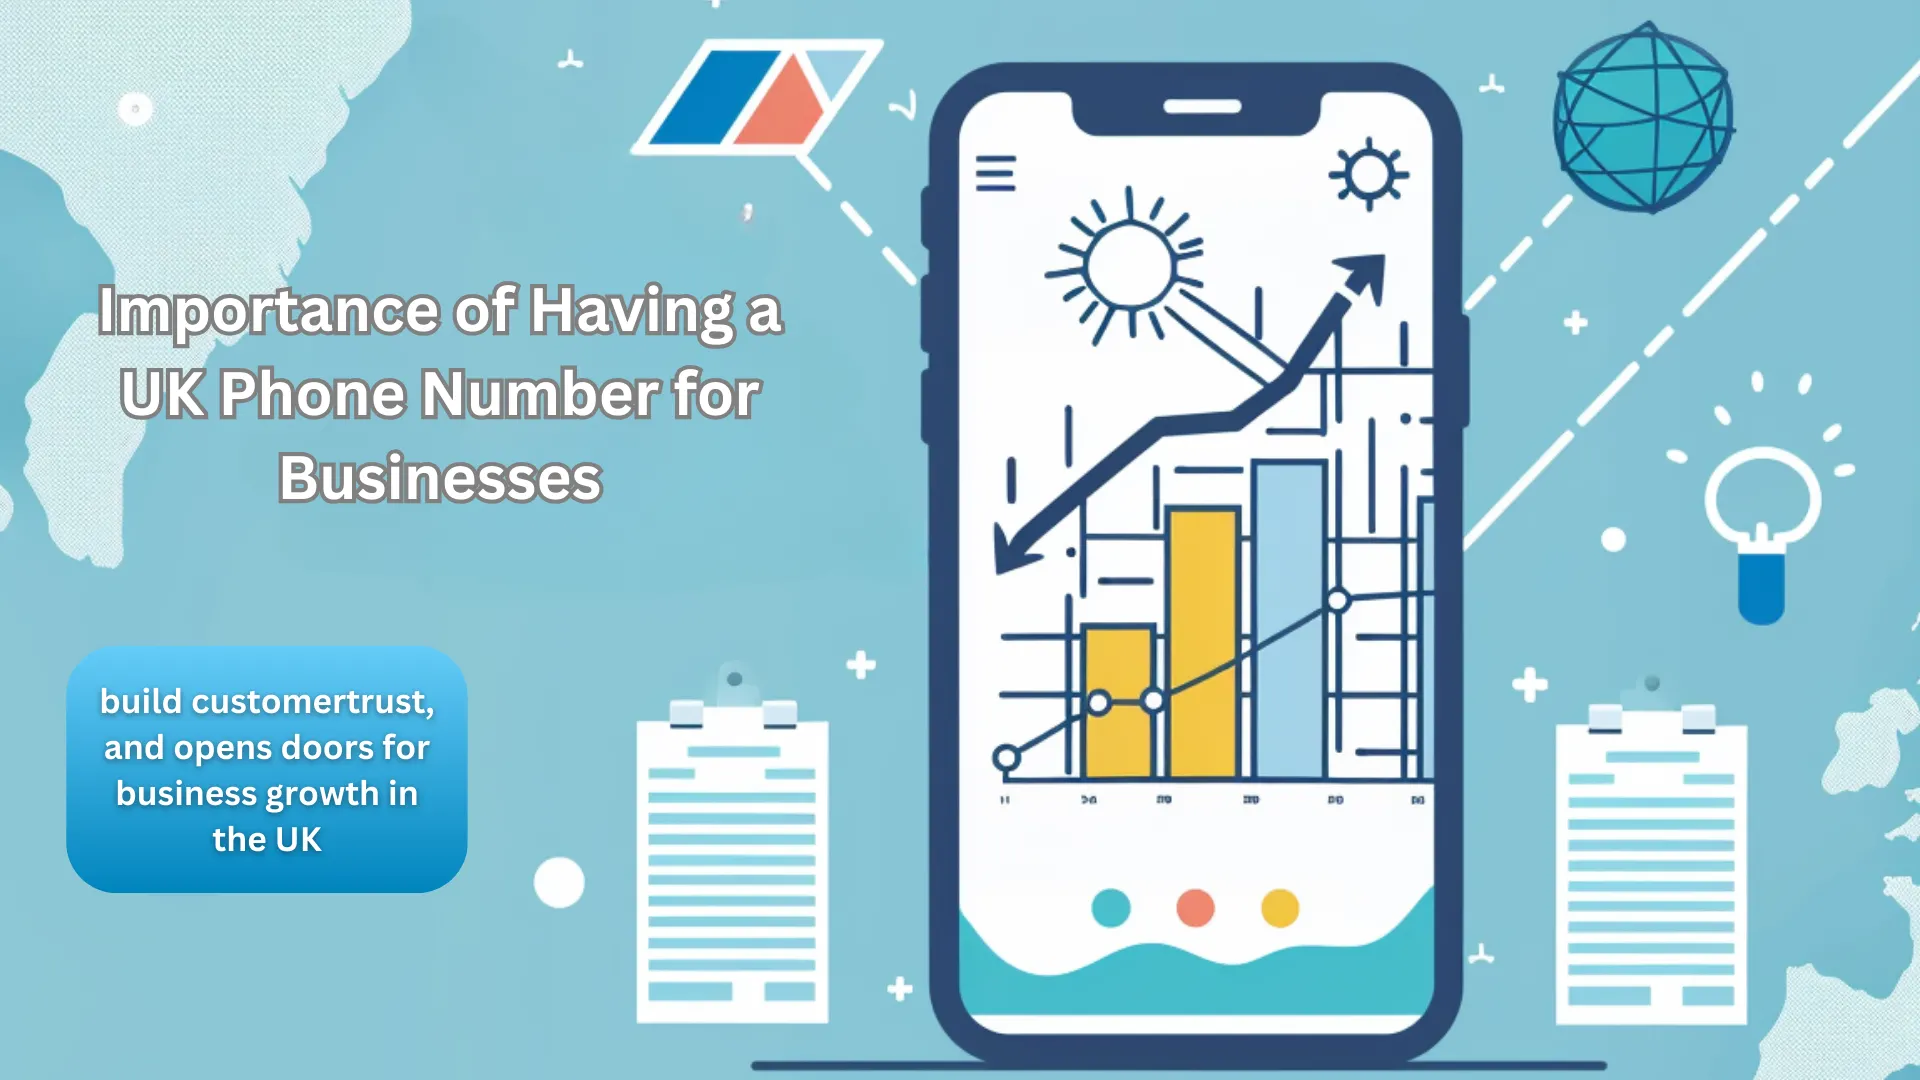 Importance of Having a UK Phone Number for Businesses